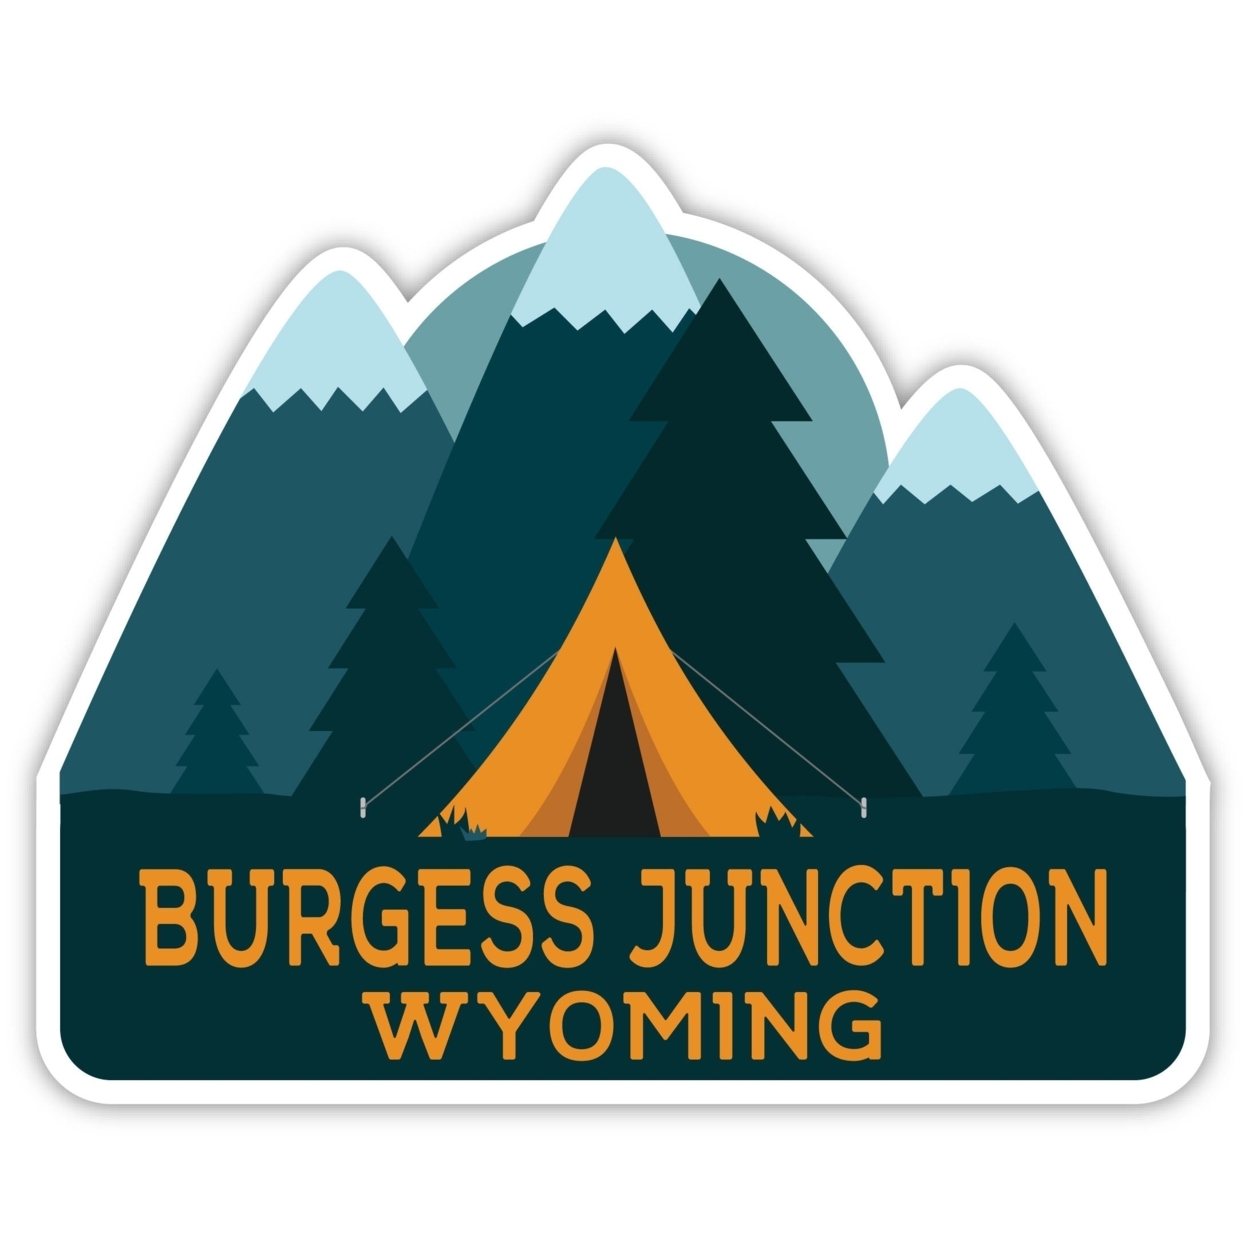 Burgess Junction Wyoming Souvenir Decorative Stickers (Choose Theme And Size) - Single Unit, 2-Inch, Bear